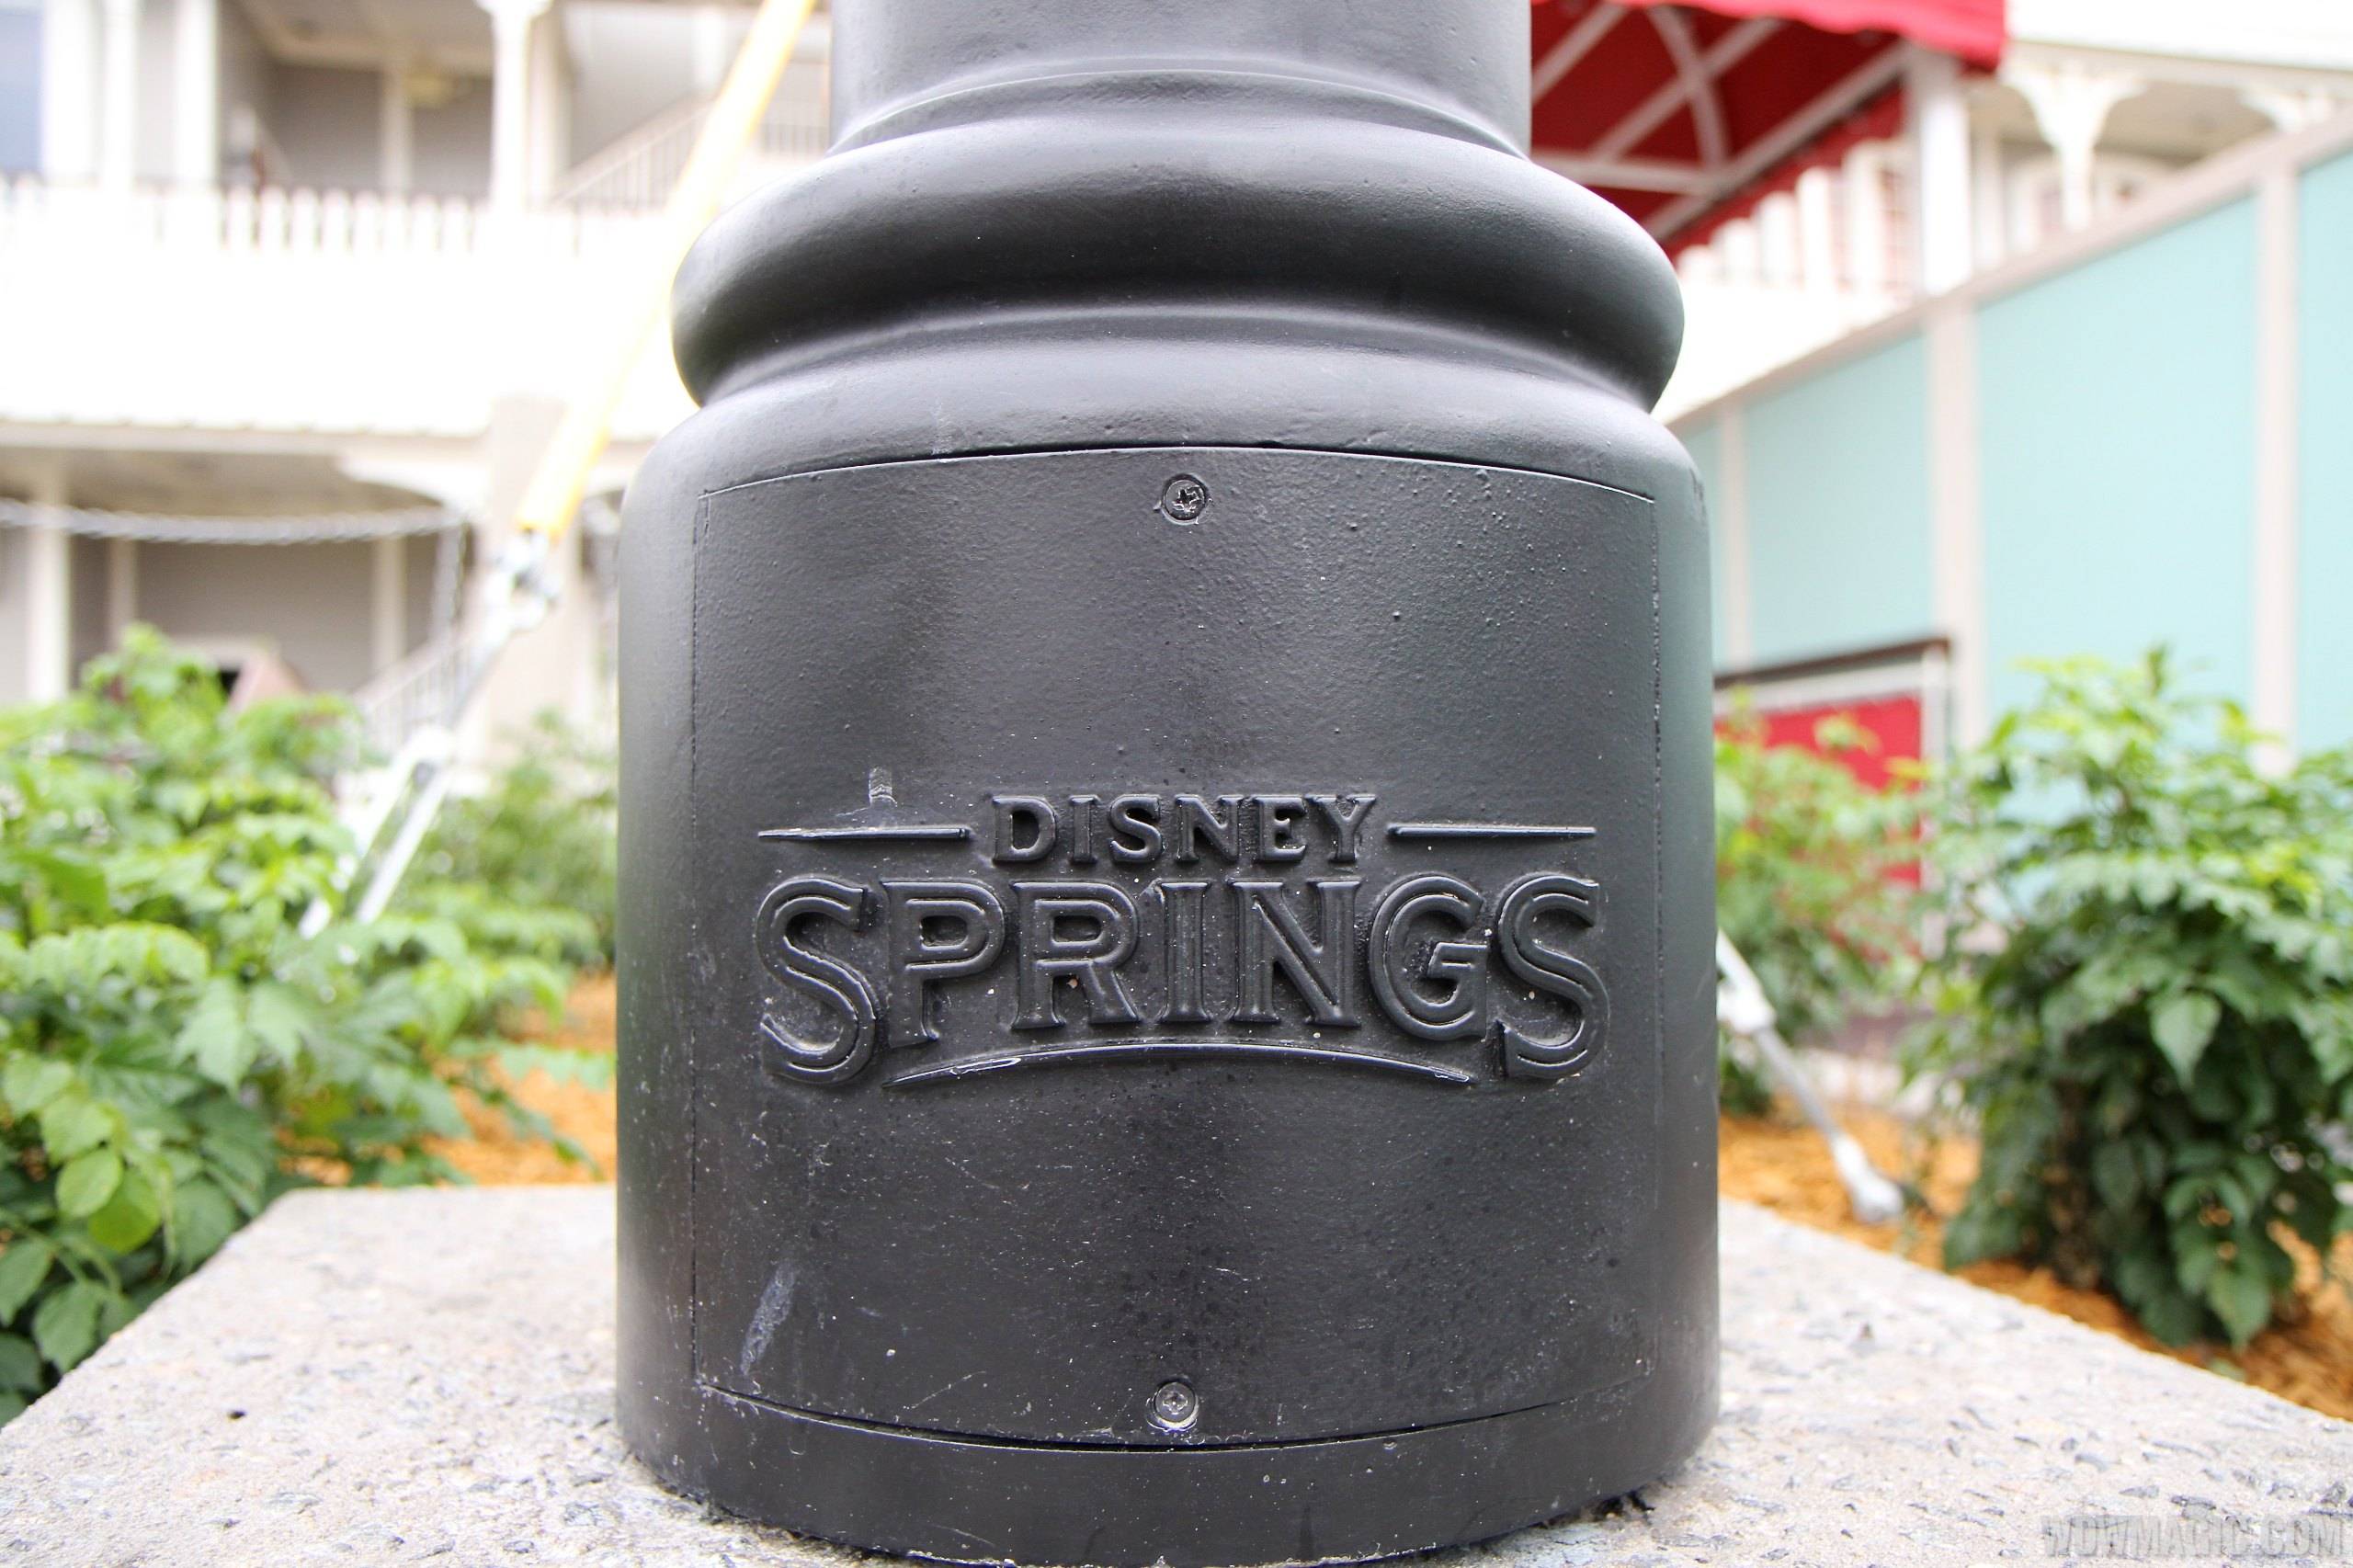 PHOTOS - Section of 'Disney Springs' walkway revealed gives a glimpse of the detail and quality that we can expect